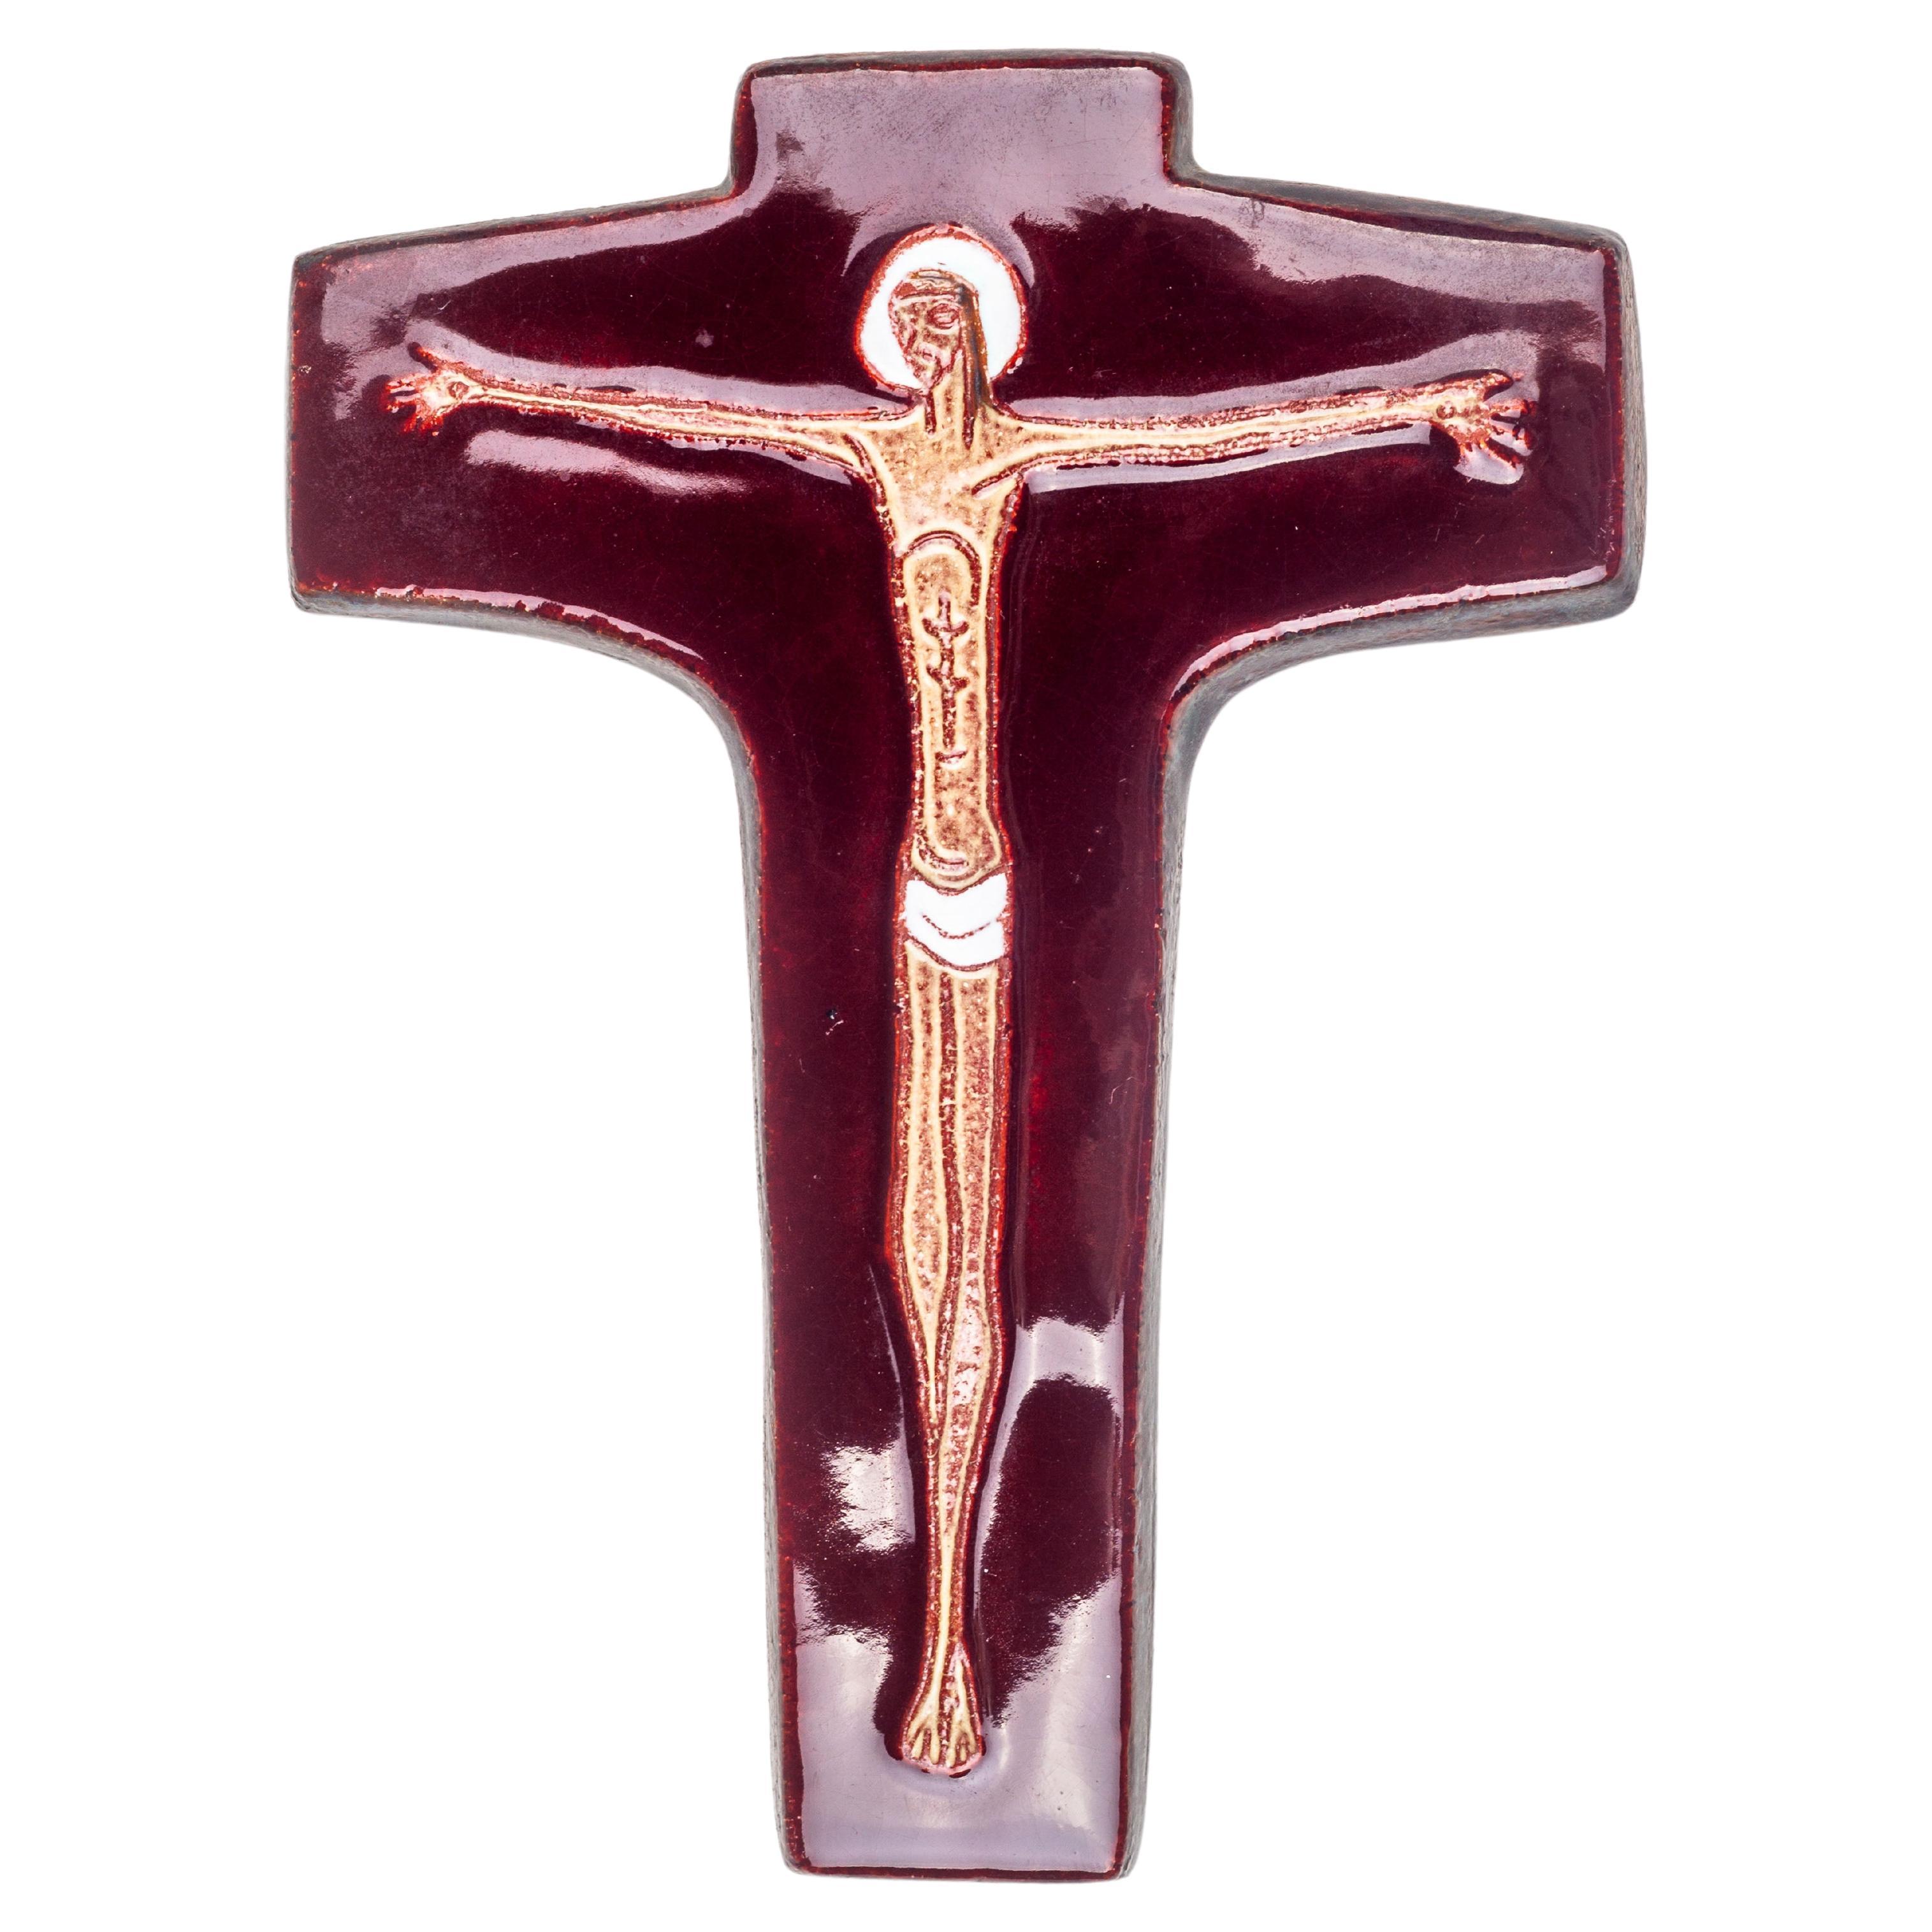 Modernist red crucifix with Christ figure, wall decoration handmade